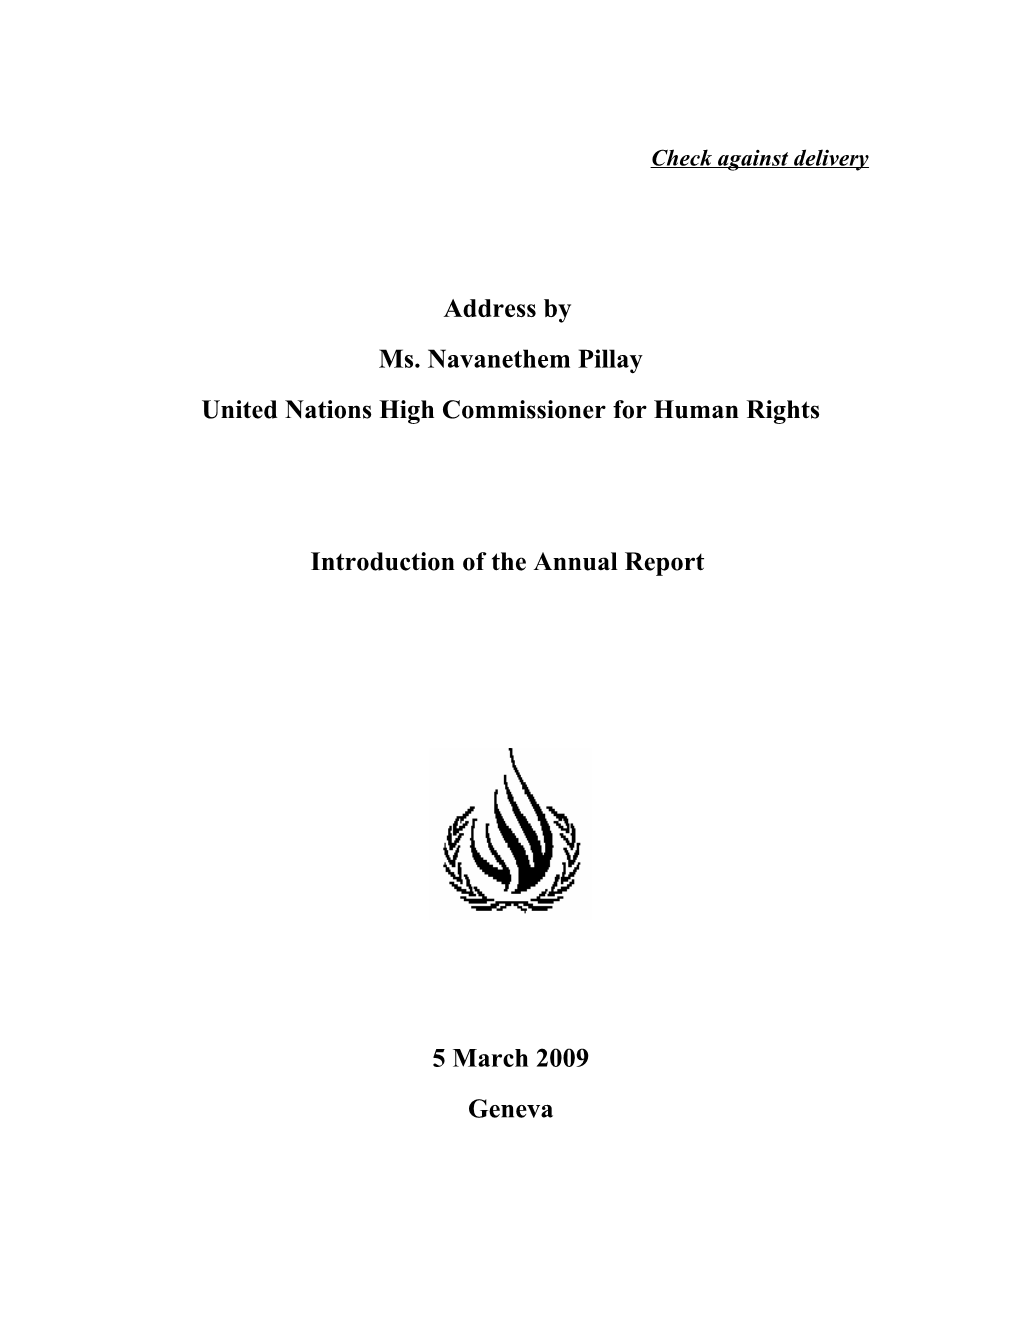 I Am Honoured to Present My First Annual Report to the Human Rights Council